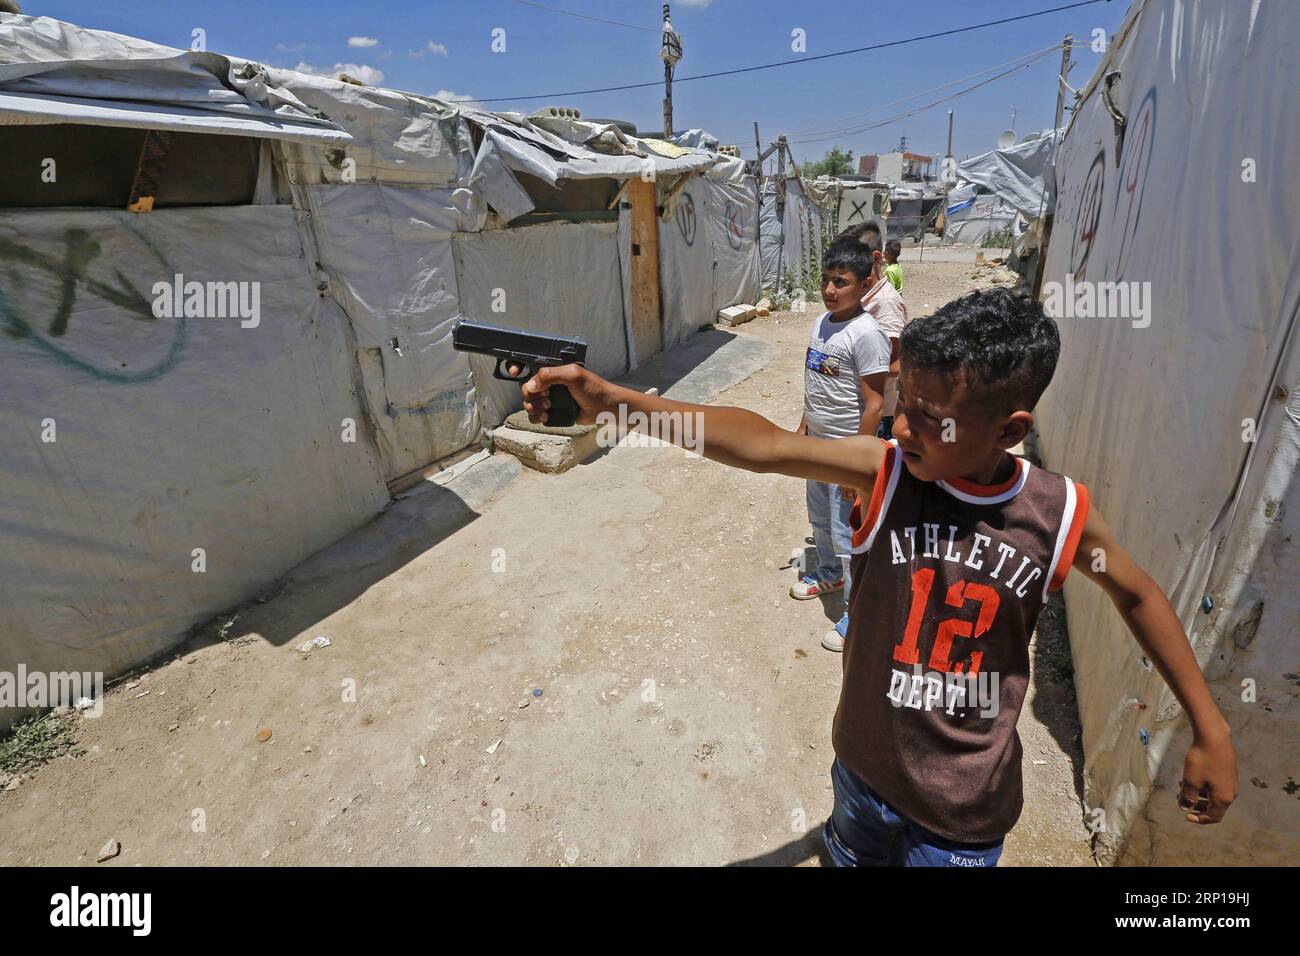 180619 -- BEIRUT, June 19, 2018 -- A refugee child holds a toy pistol at a Syrian refugee camp in Bar Elias, Bekaa Valley, eastern Lebanon, on June 19, 2018, ahead of World Refugee Day. After years of war in Syria, Syrian refugees continued their lives in Lebanon. The number of people forcibly displaced due to wars, other violence, and persecution worldwide reached a new high in 2017 to 68.5 million, 2.9 million more than the year before, the UN refugee agency, UNHCR, said Tuesday.  LEBANON-BEKAA VALLEY-BAR ELIAS-SYRIAN REFUGEE CAMP BilalxJawich PUBLICATIONxNOTxINxCHN Stock Photo